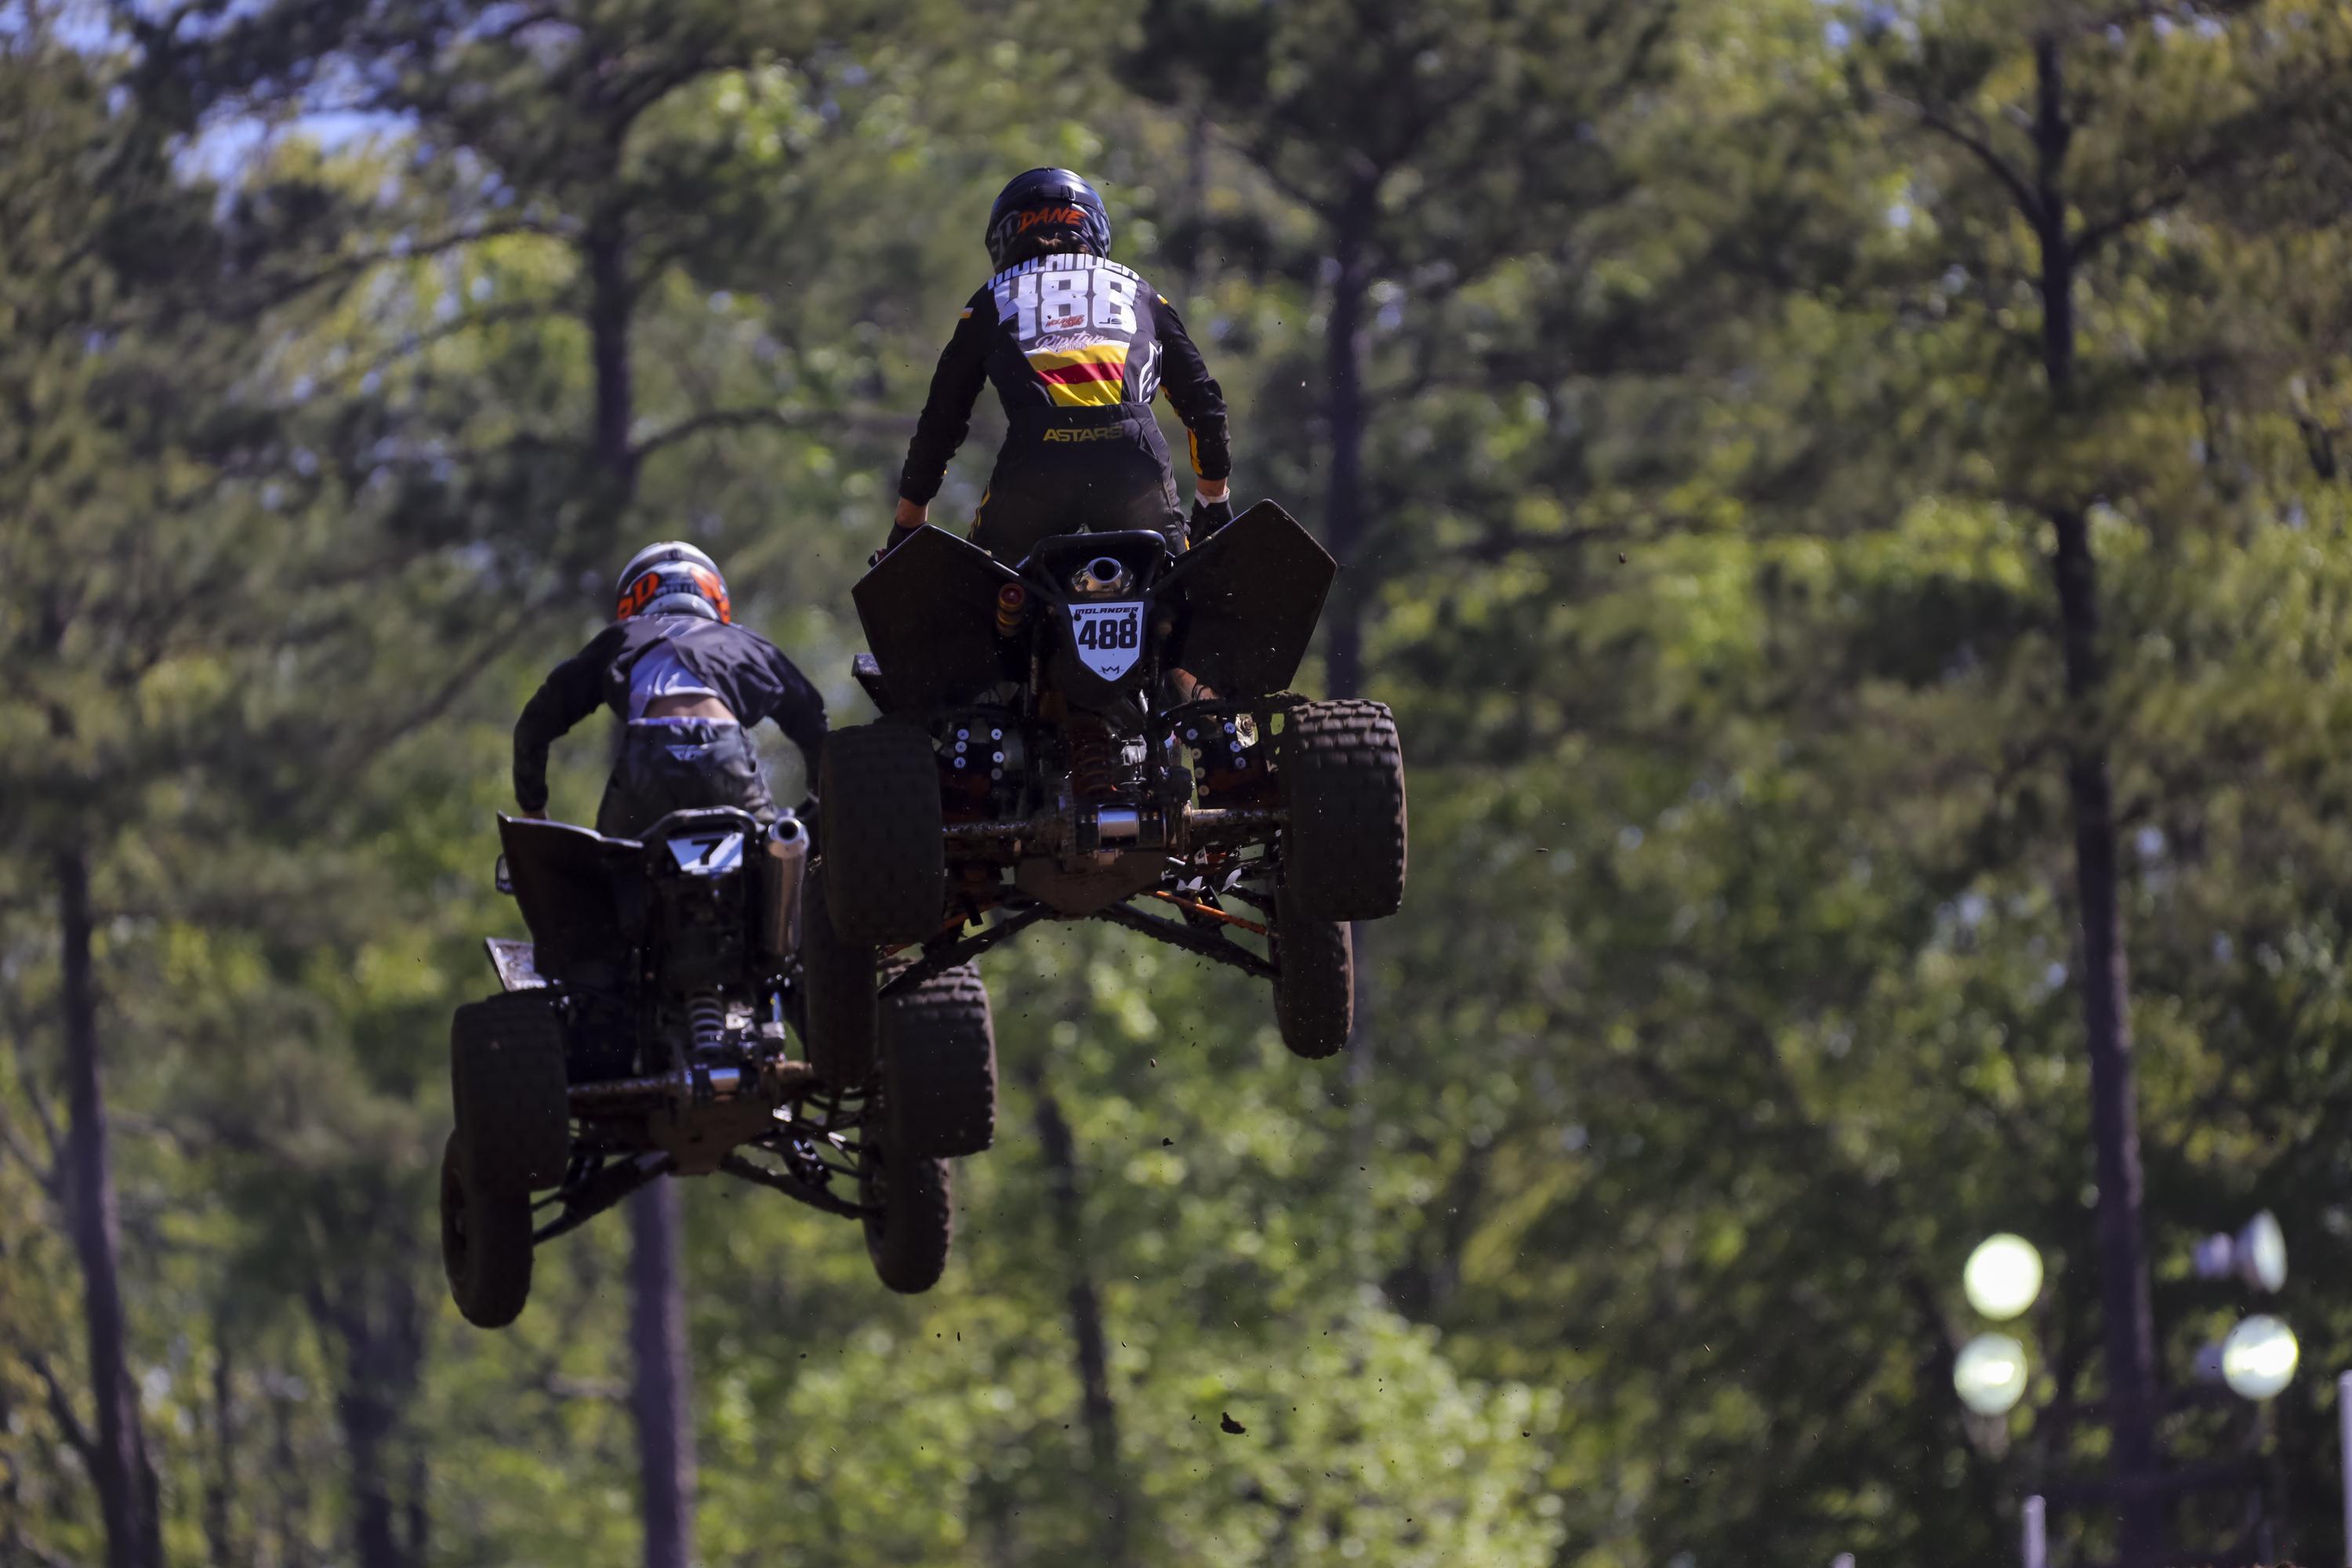 ATV Motocross Returns to High Point Raceway This Weekend